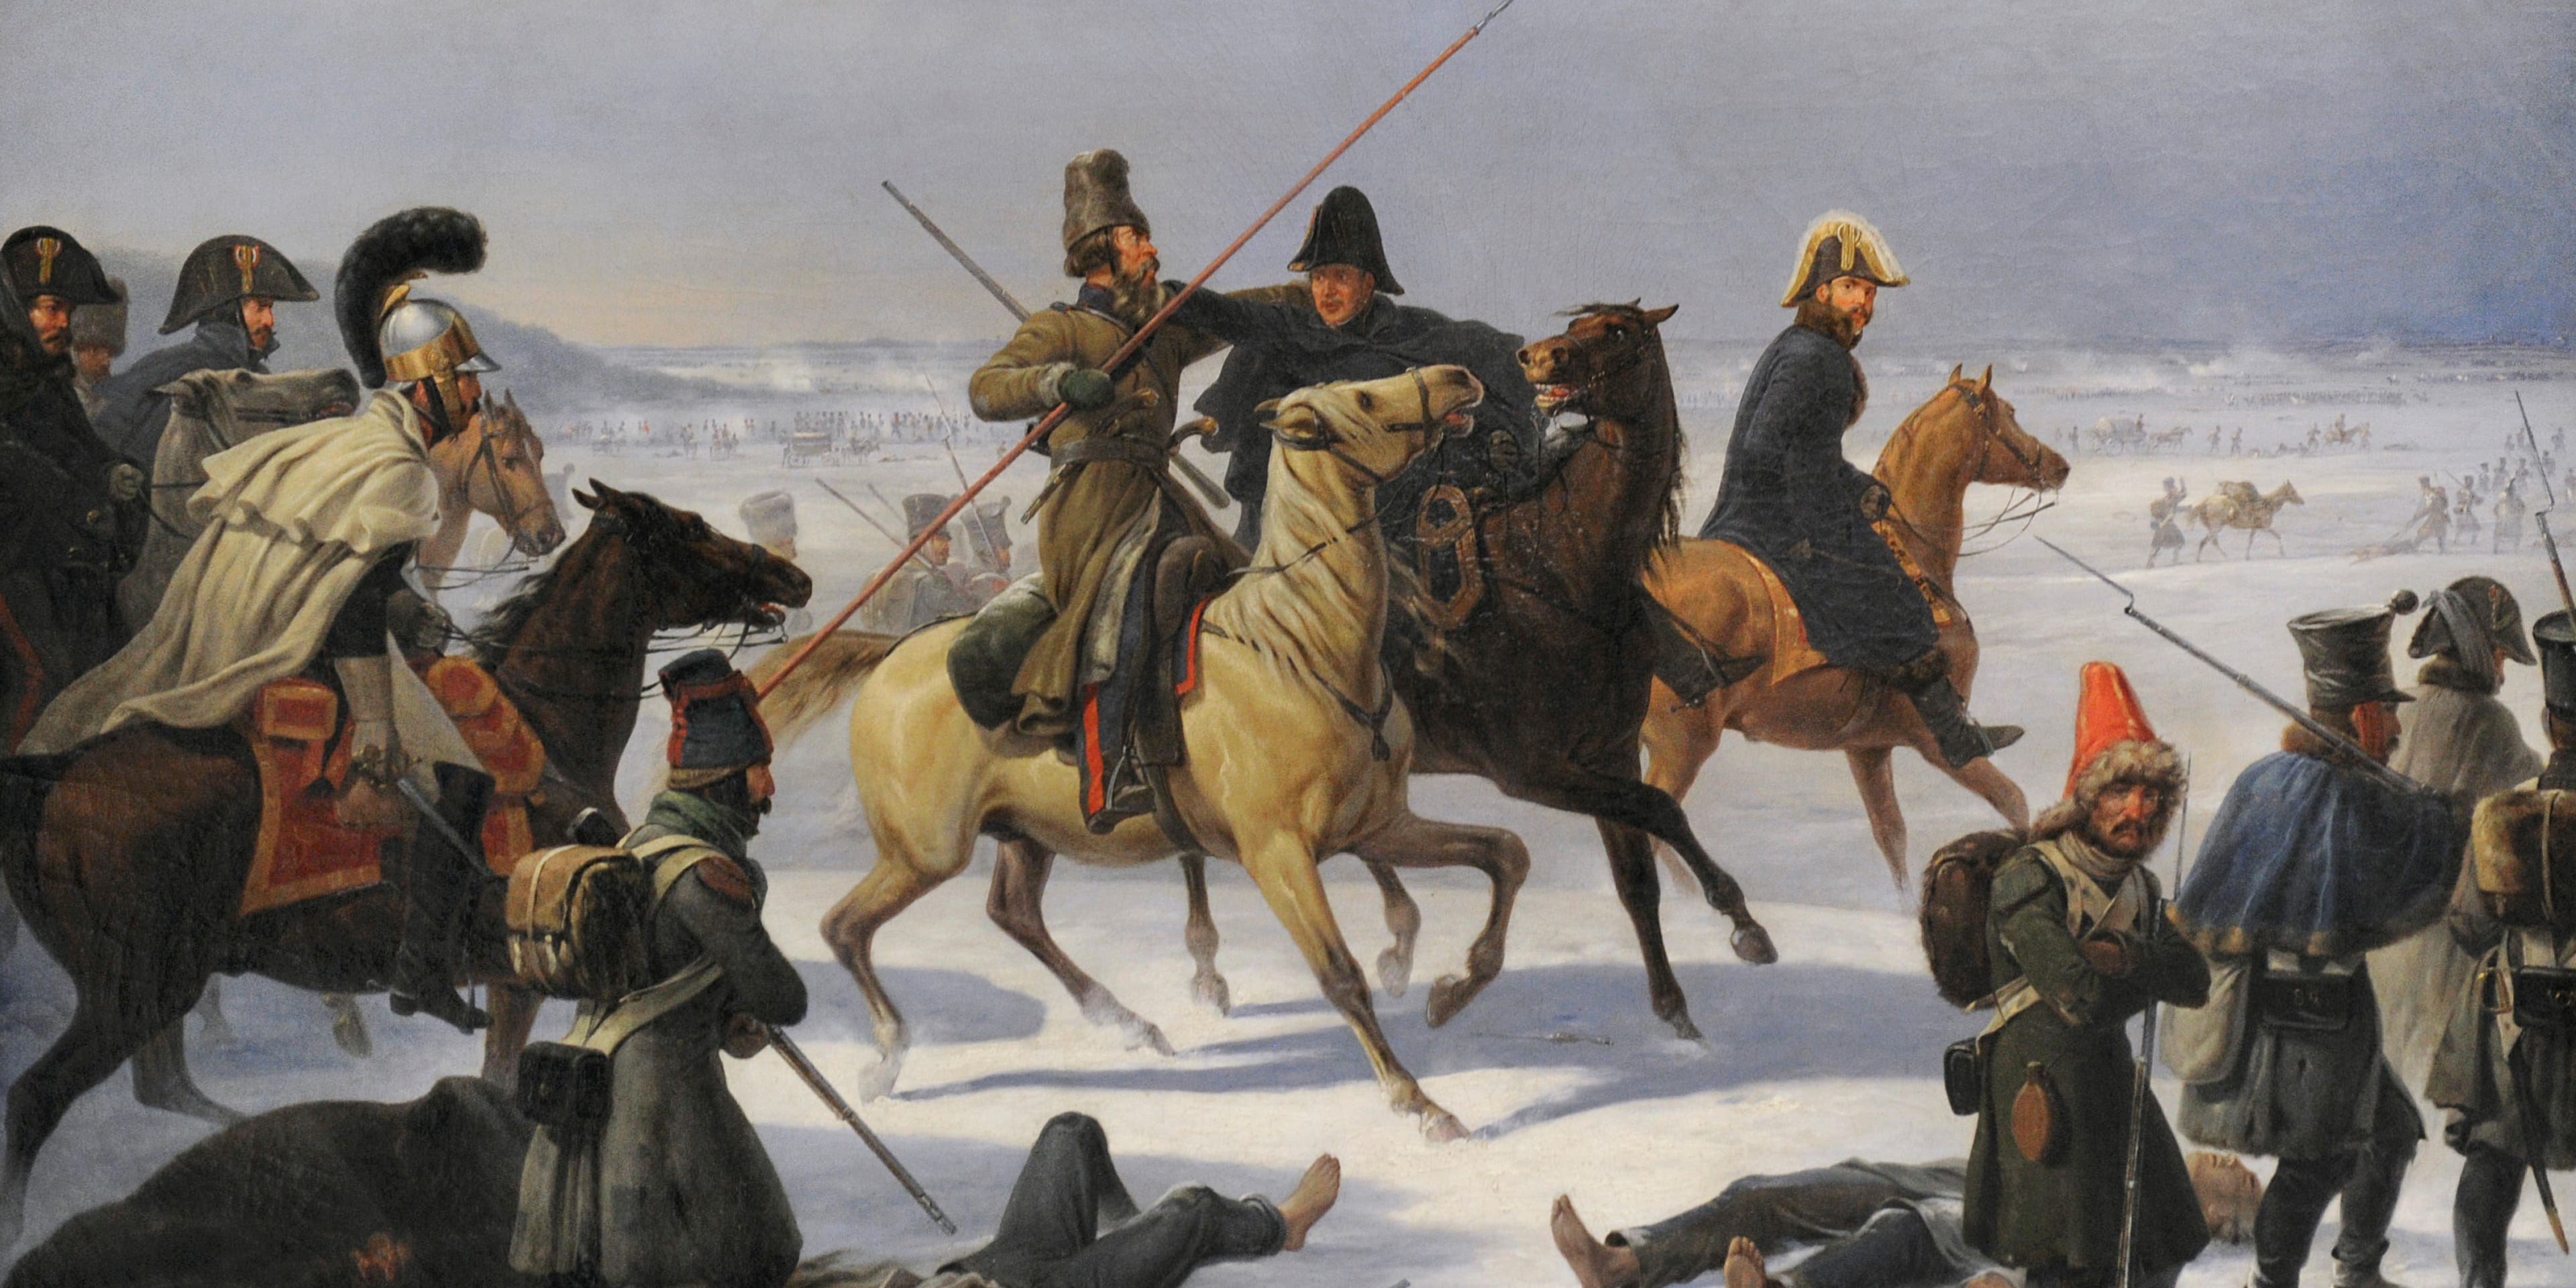 The French Army retreats from Moscow in this painting by Polish artist January Suchodolski (1797-1875).